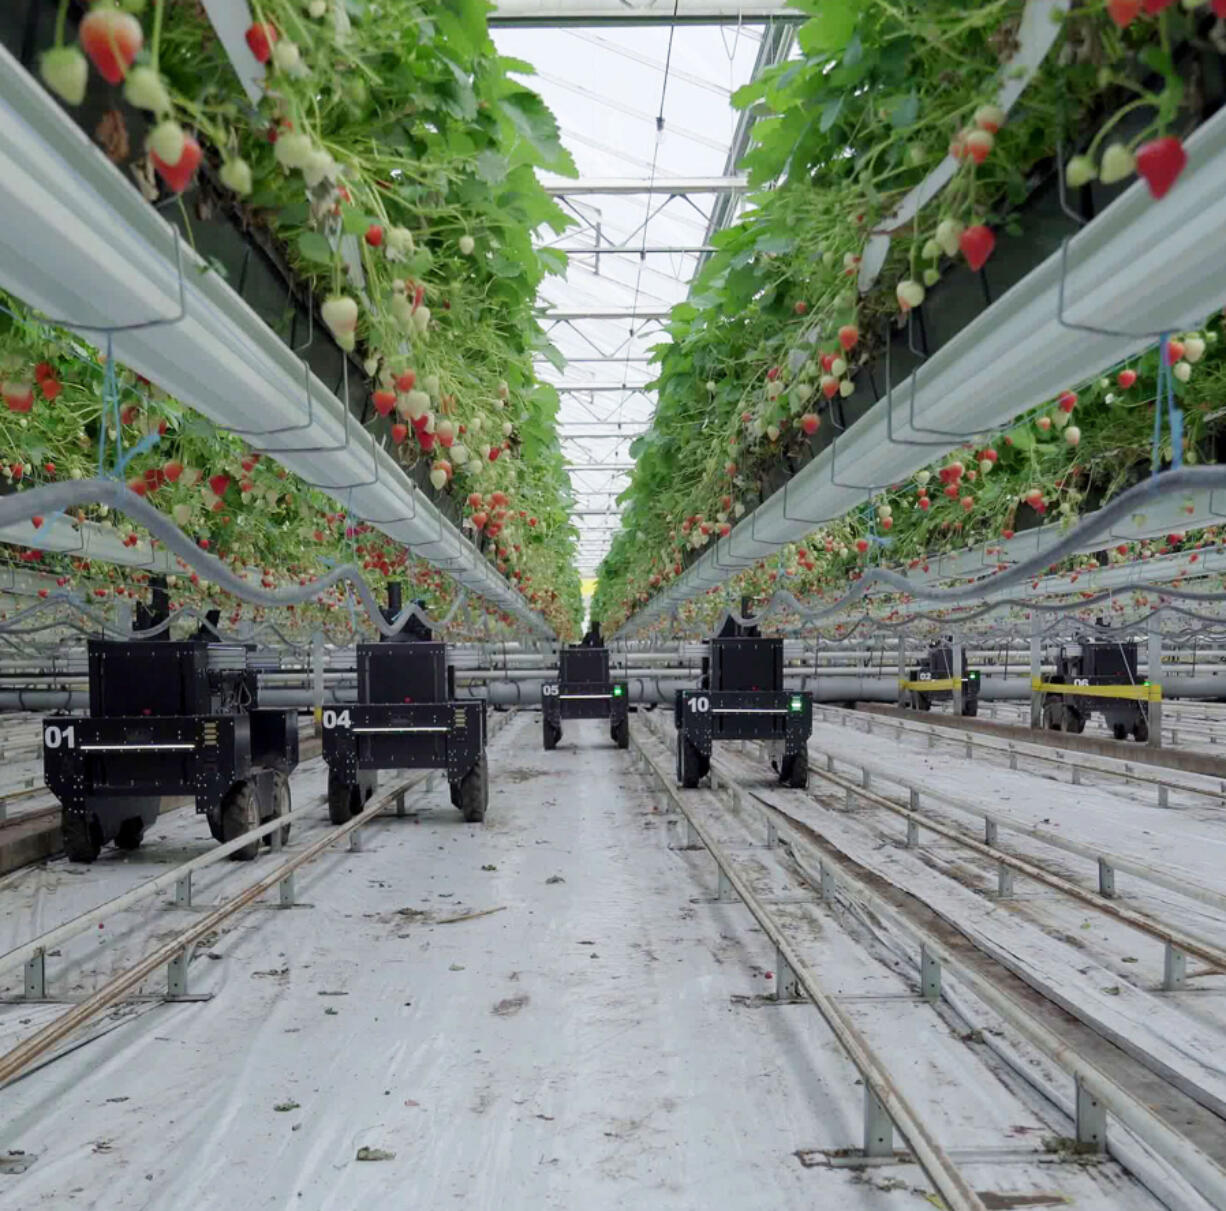 Tortuga AgTech???s pitch to growers is a subscription model that charges them a flat cost per robot-picked box of strawberries at a rate comparable to human worker wages. Unlike a human, the Tortuga bot doesn???t need breaks, can???t get sick, is always ready to work, and can pick all day and into the night.